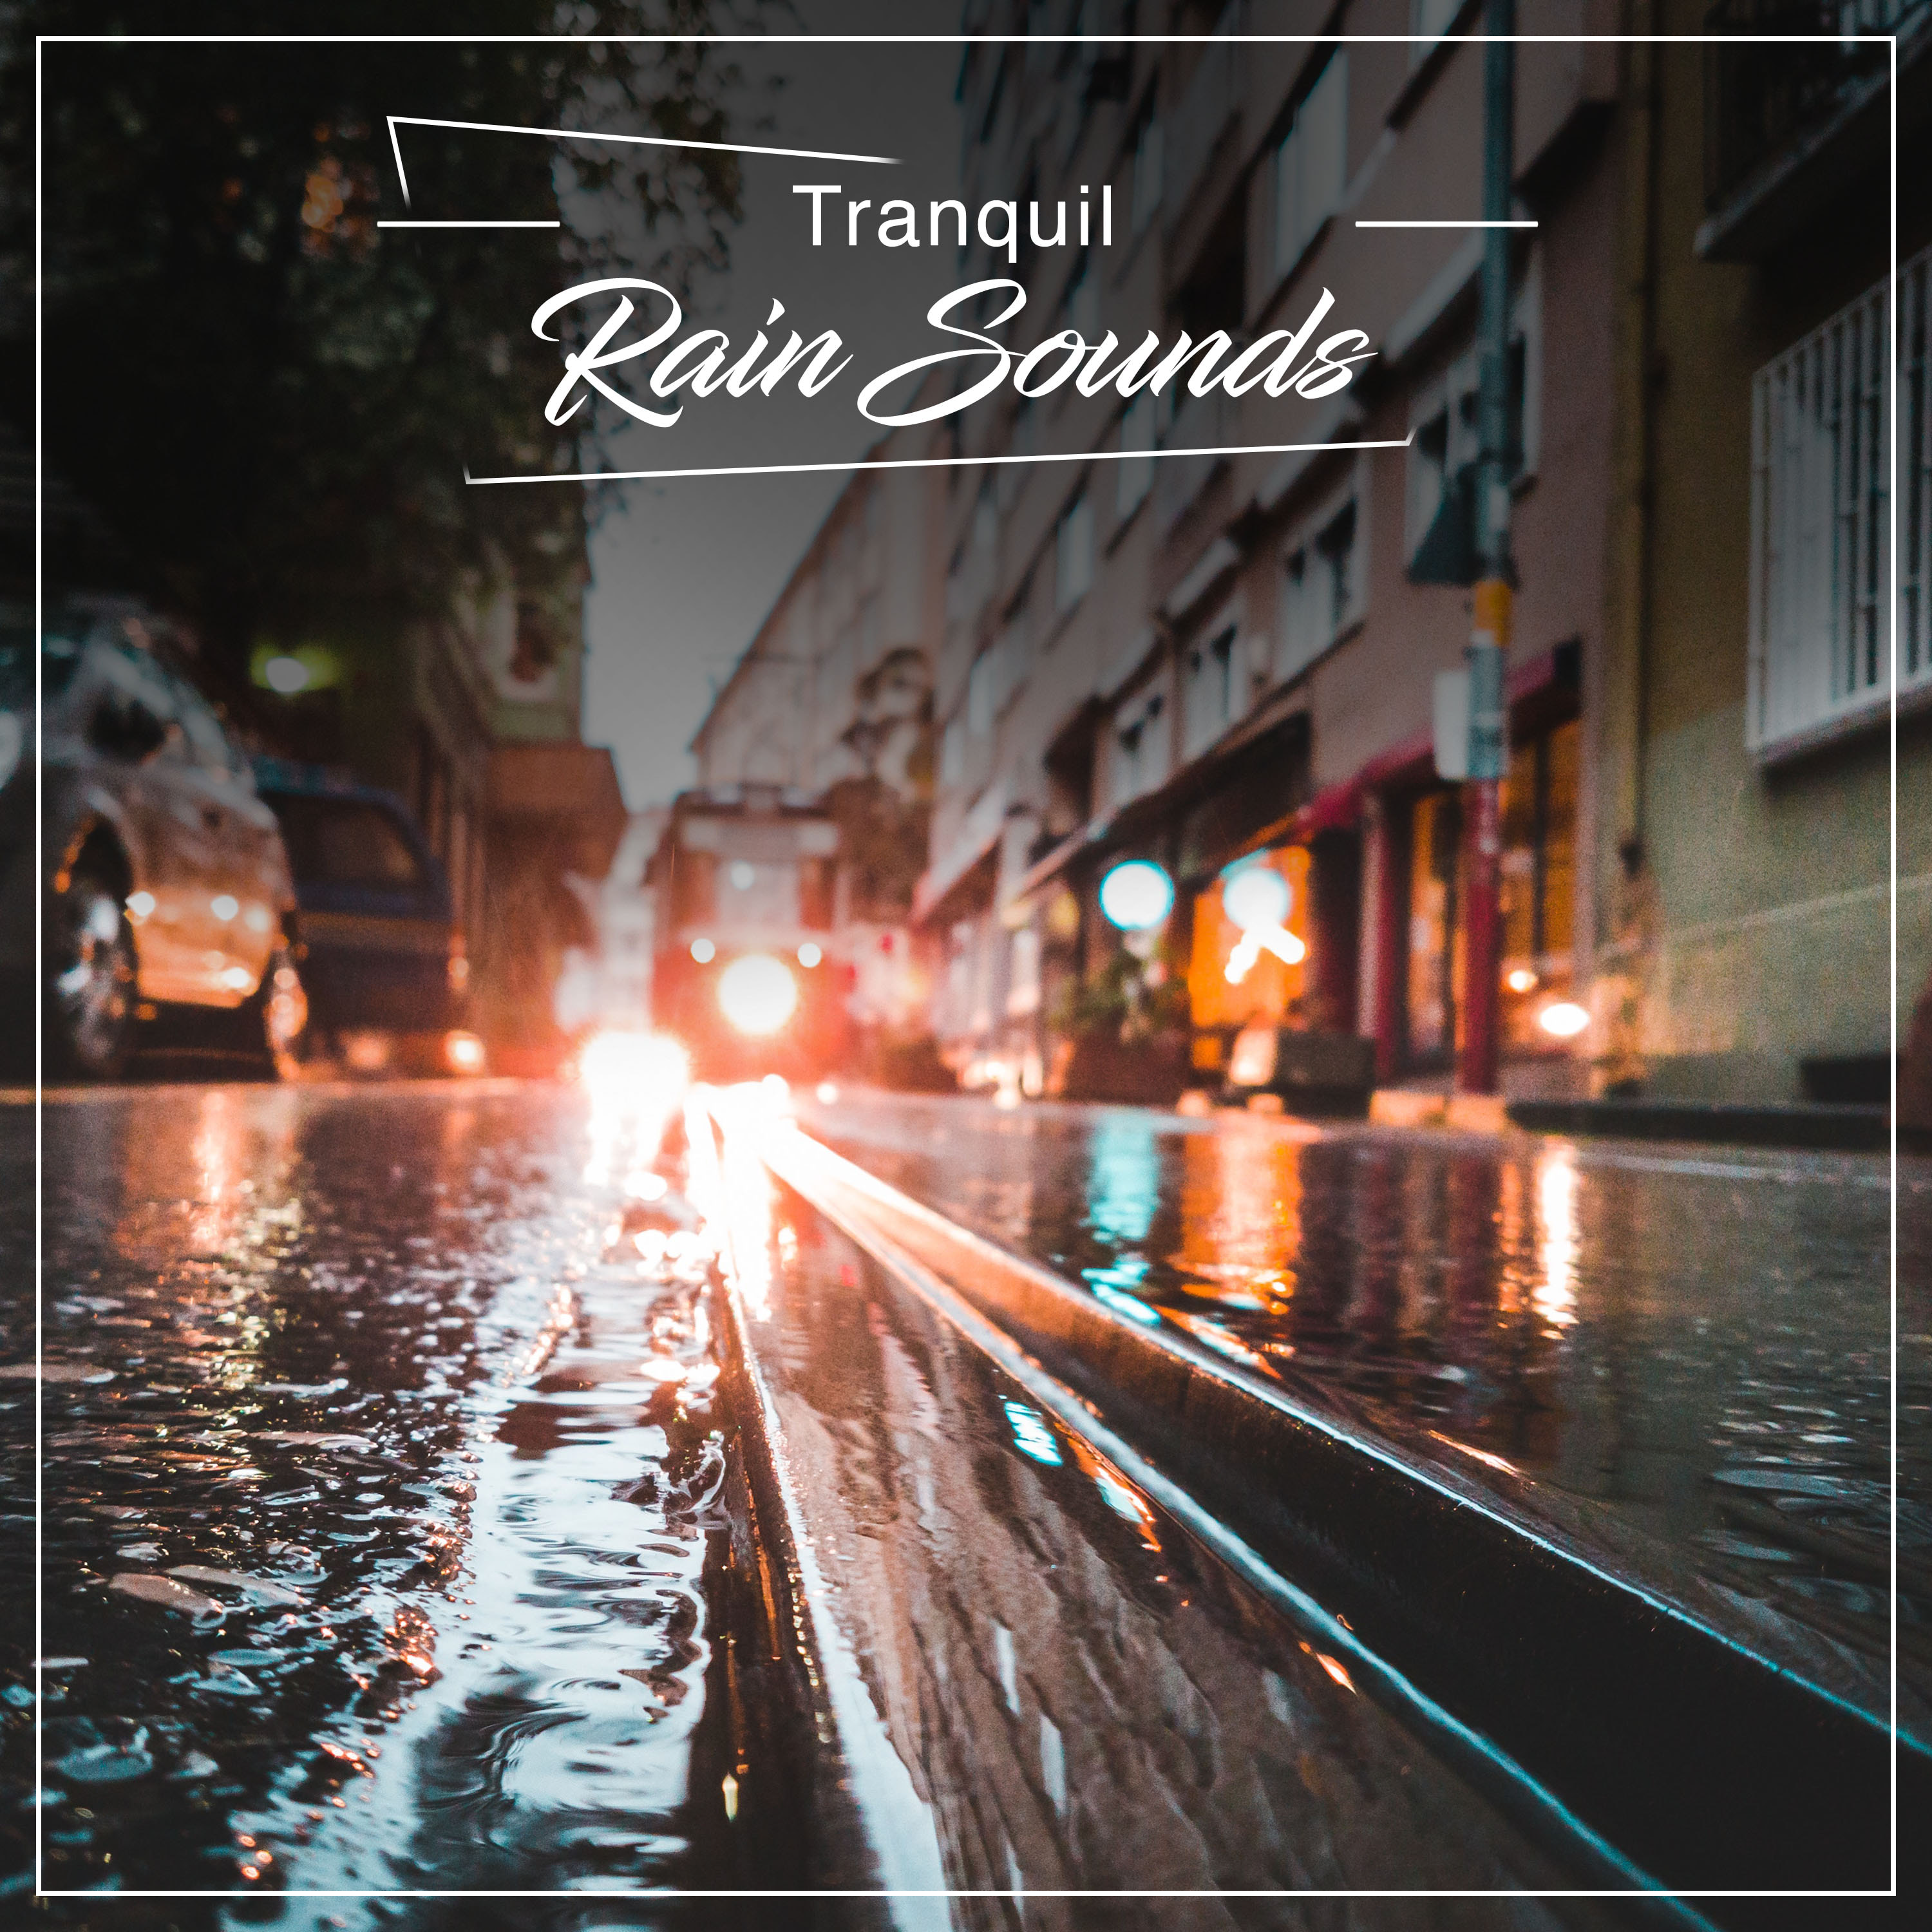 13 Tranquil Rain Sounds for Sleeping